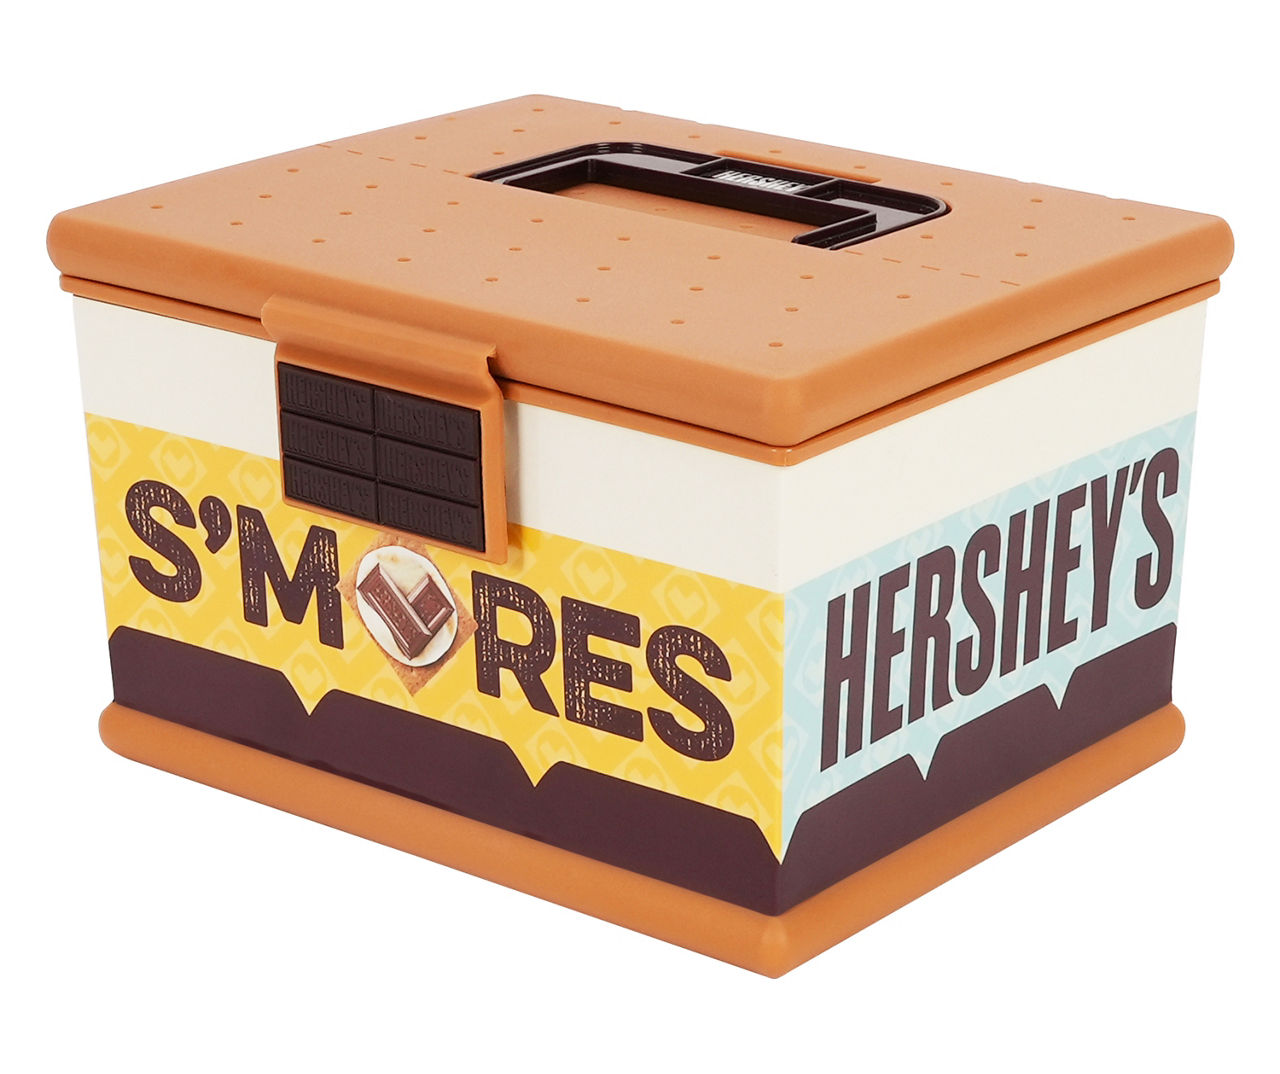 Hersheys Smores Candy Marshmallow Chocolate Bar Storage Box Container Carry Case 